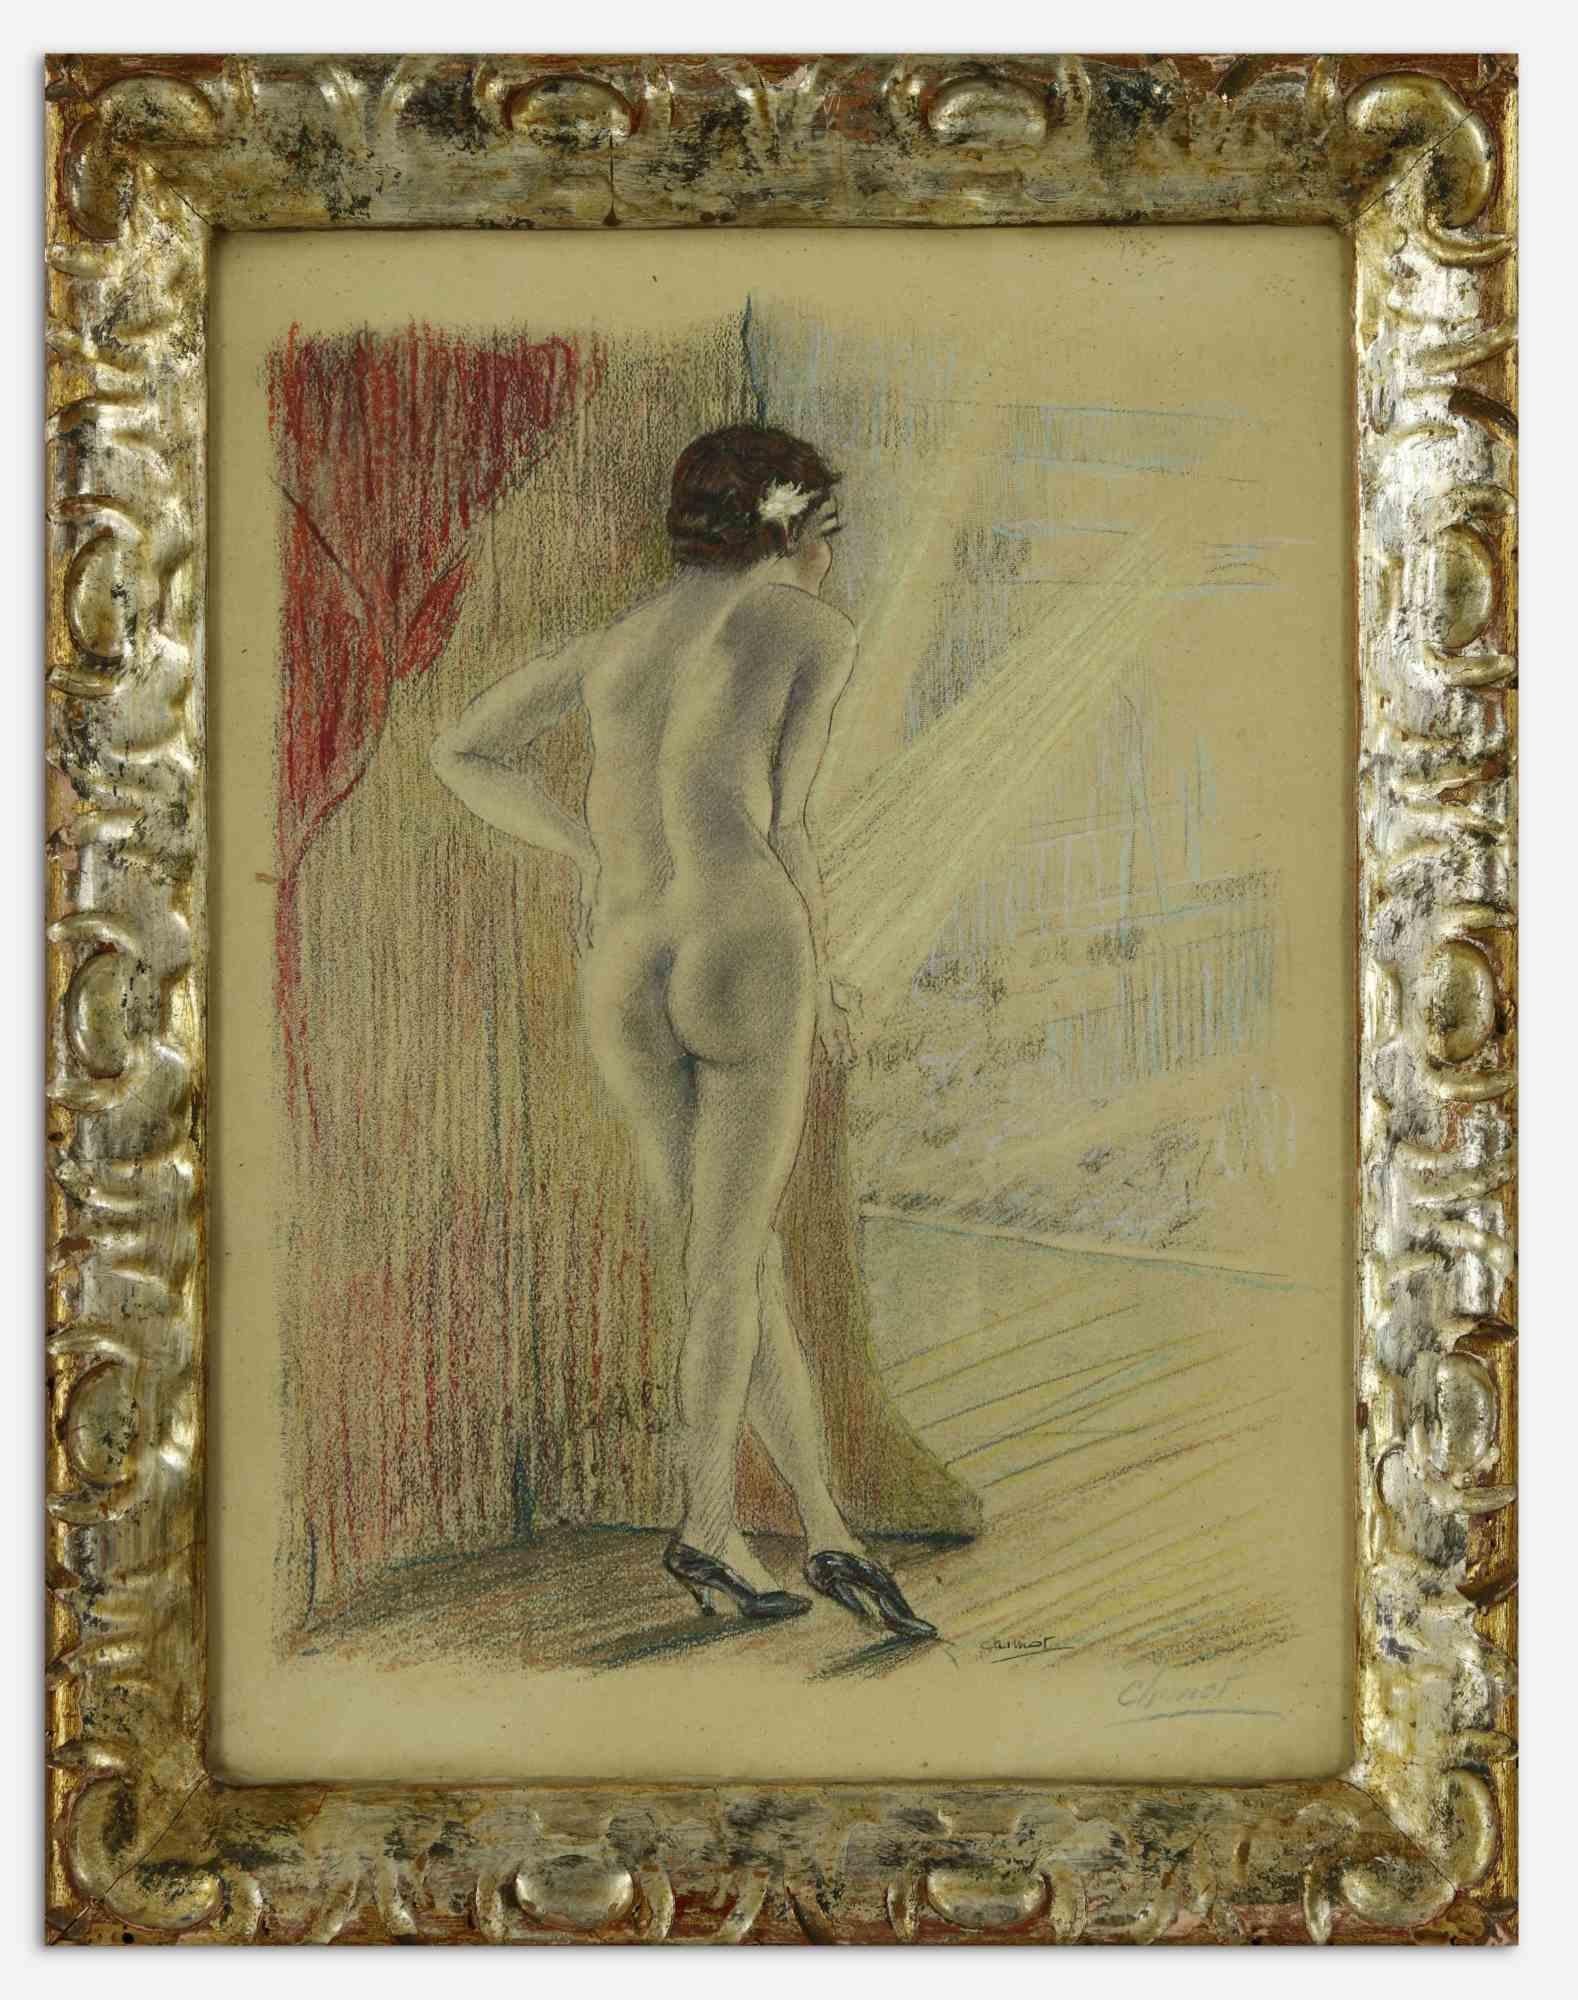 Model in Theatre -  Lithograph by Edouard Chimot - Early 20th Century